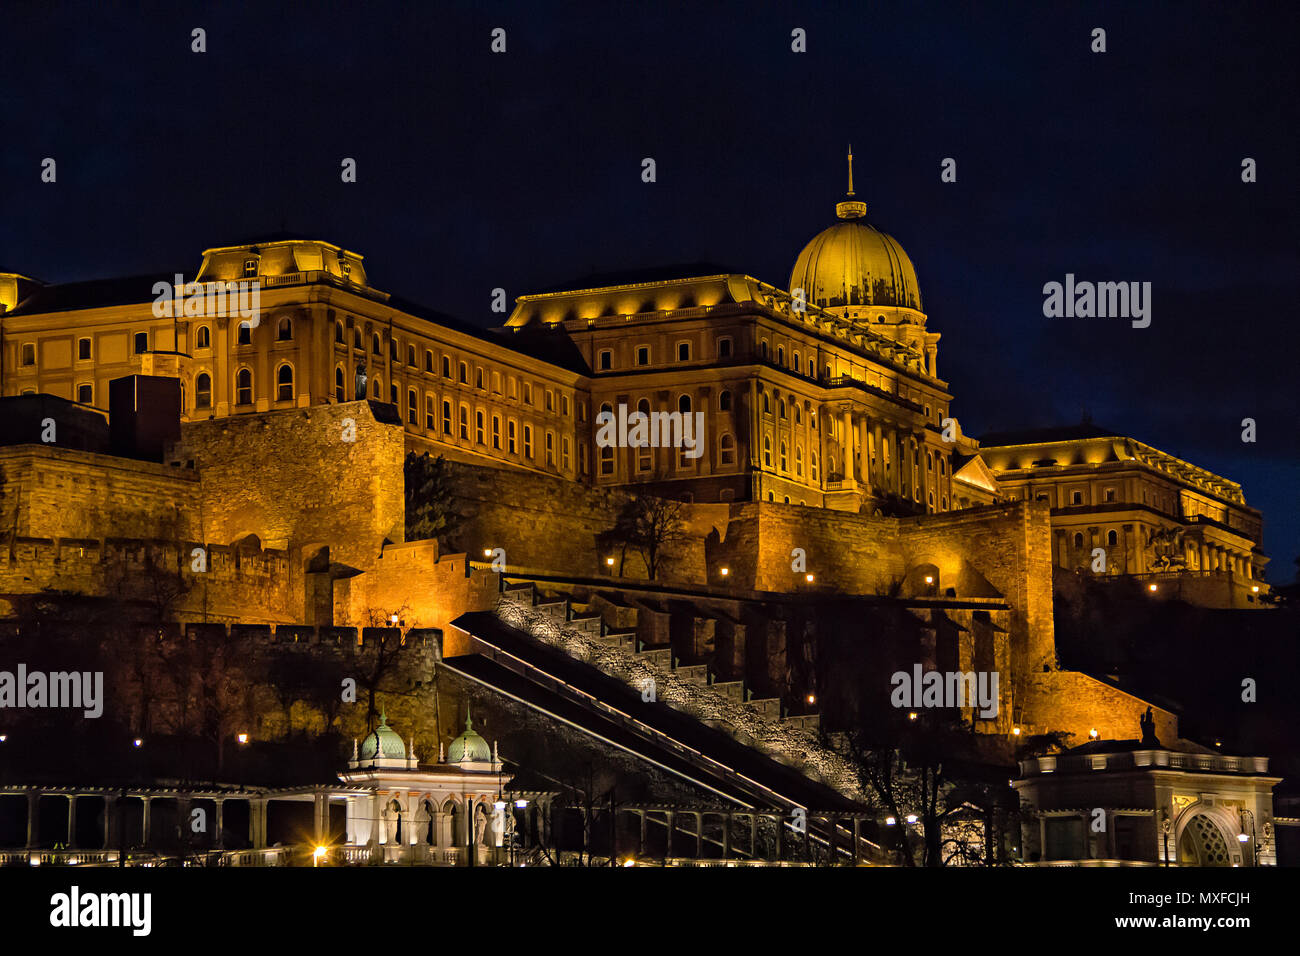 View over Buda side of Budapest with illuminated Buda castle and Danube river from viewpoint on a touristic motor ship at night in Budapest, Hungary Stock Photo